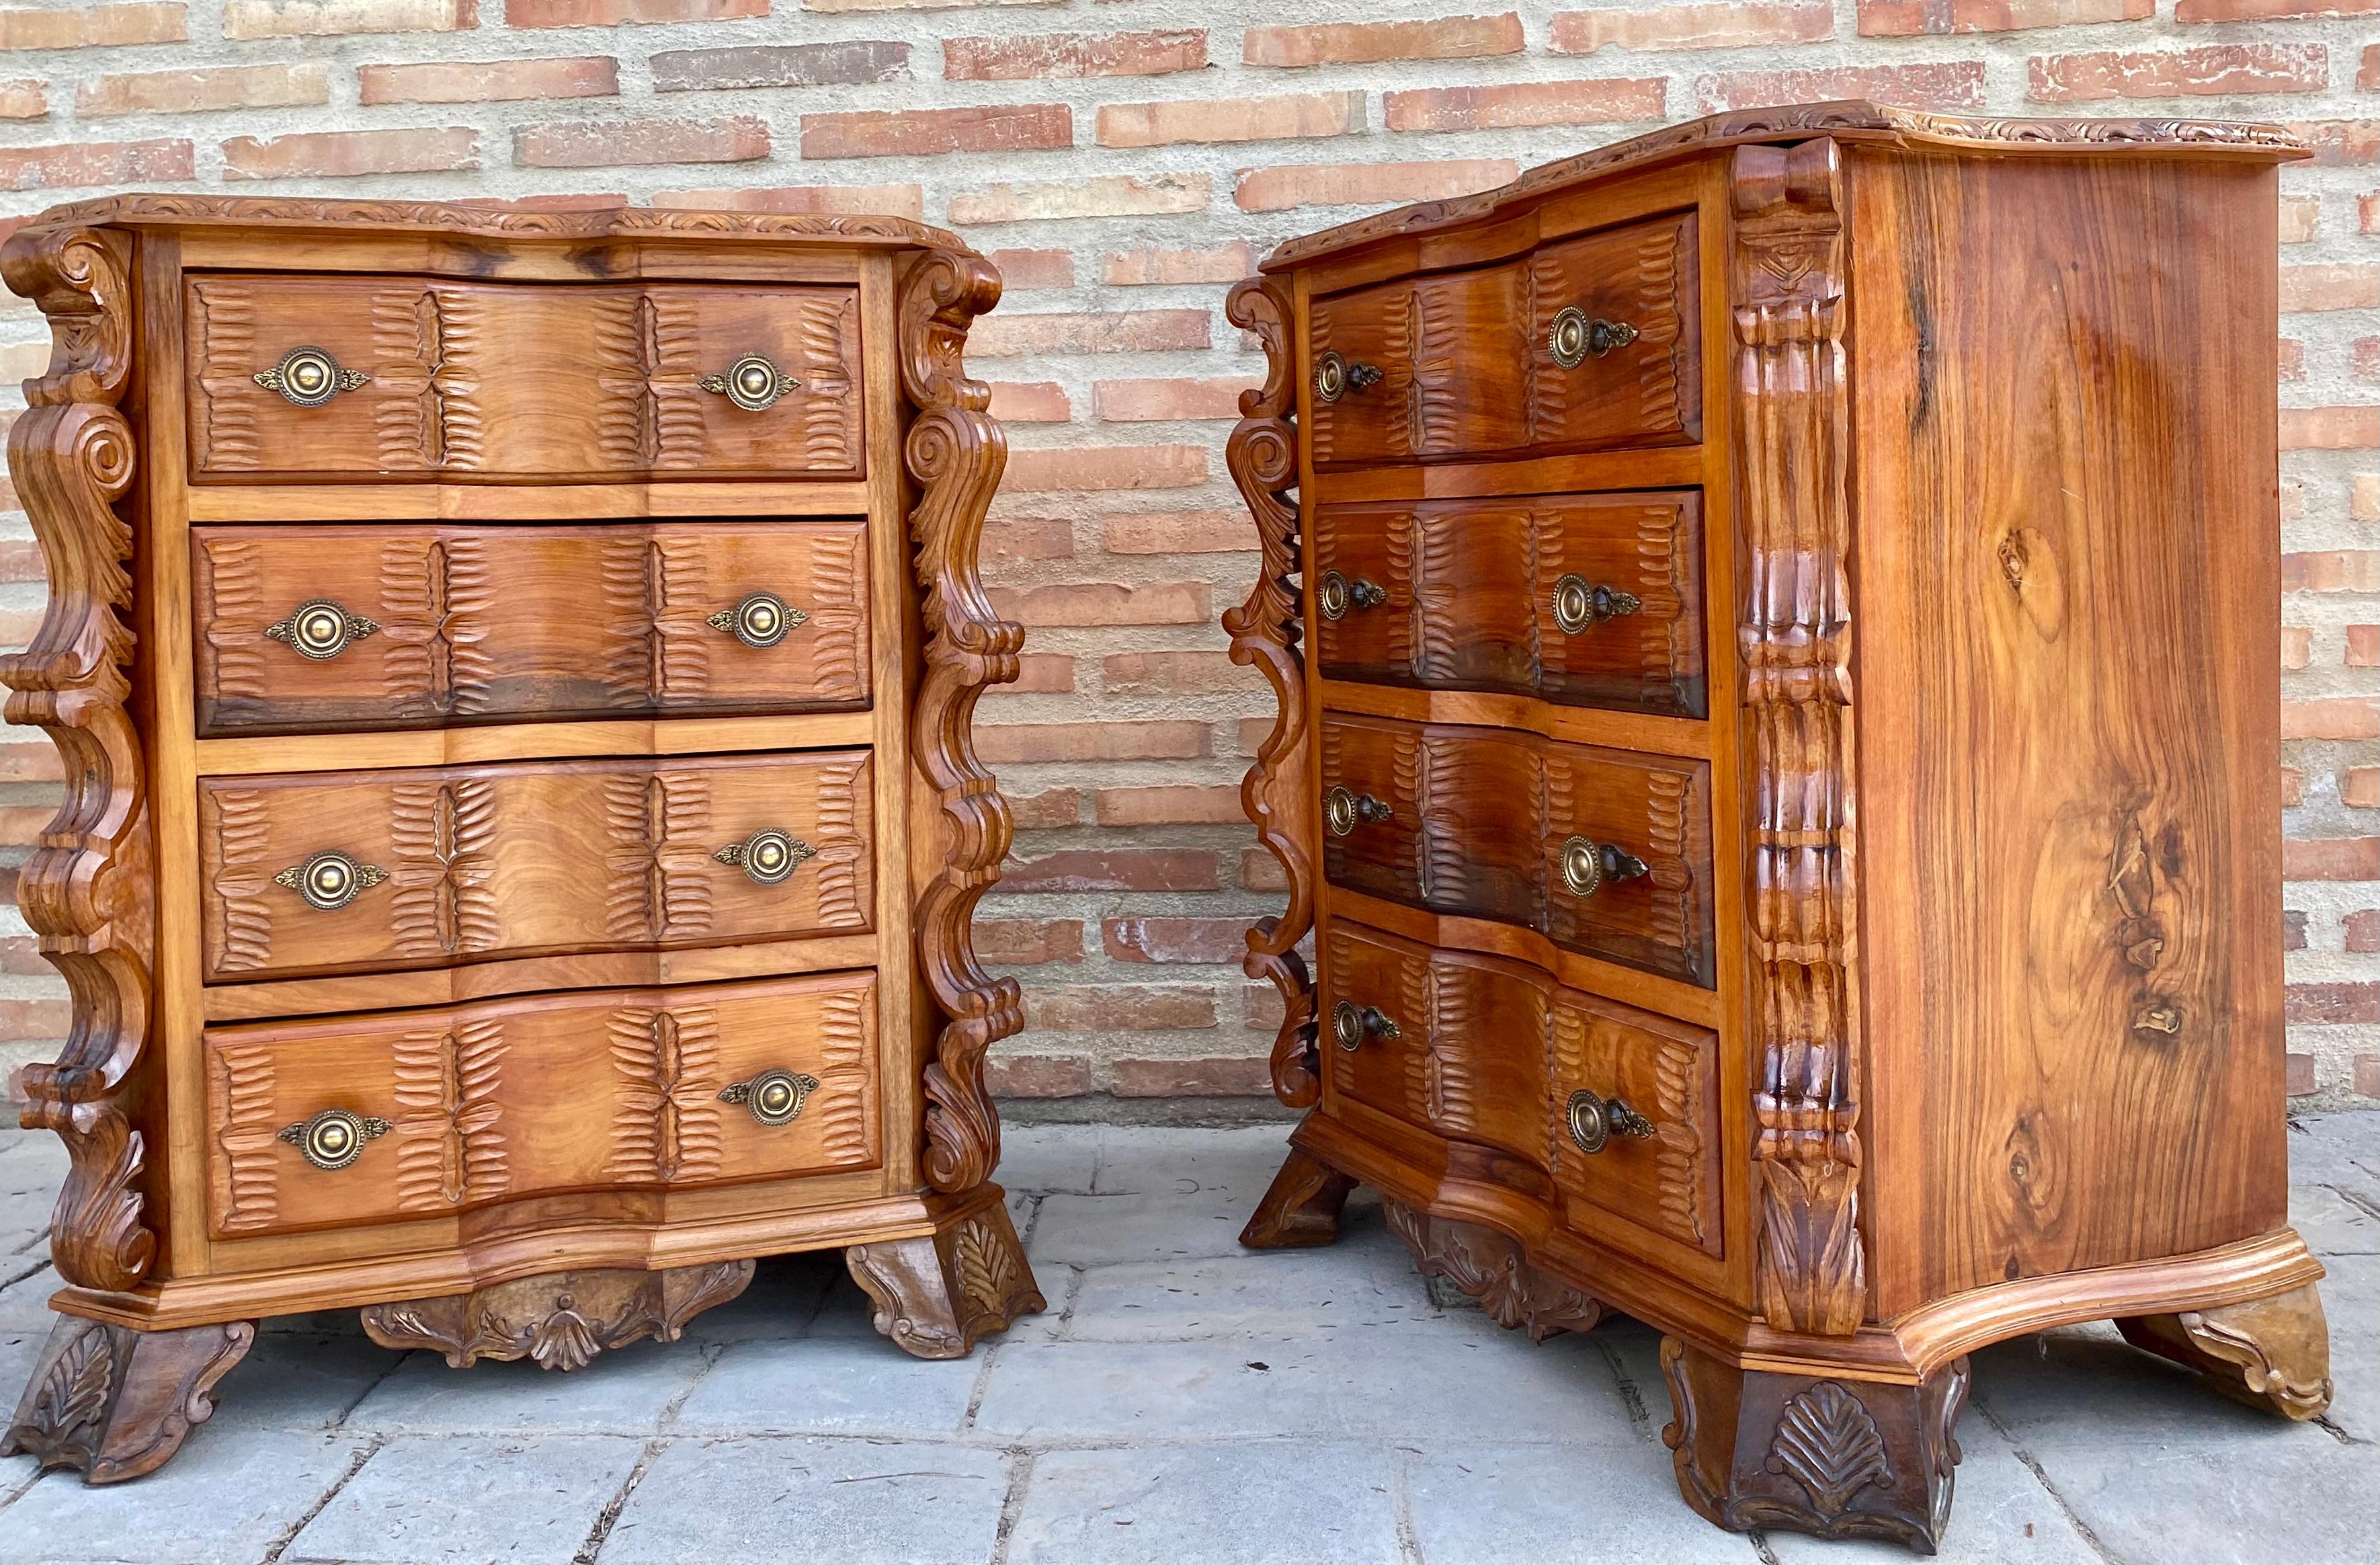 Baroque Early 20th Century Italian Burl Walnut and Fruitwood Bedside Commodes, Set of 2 For Sale